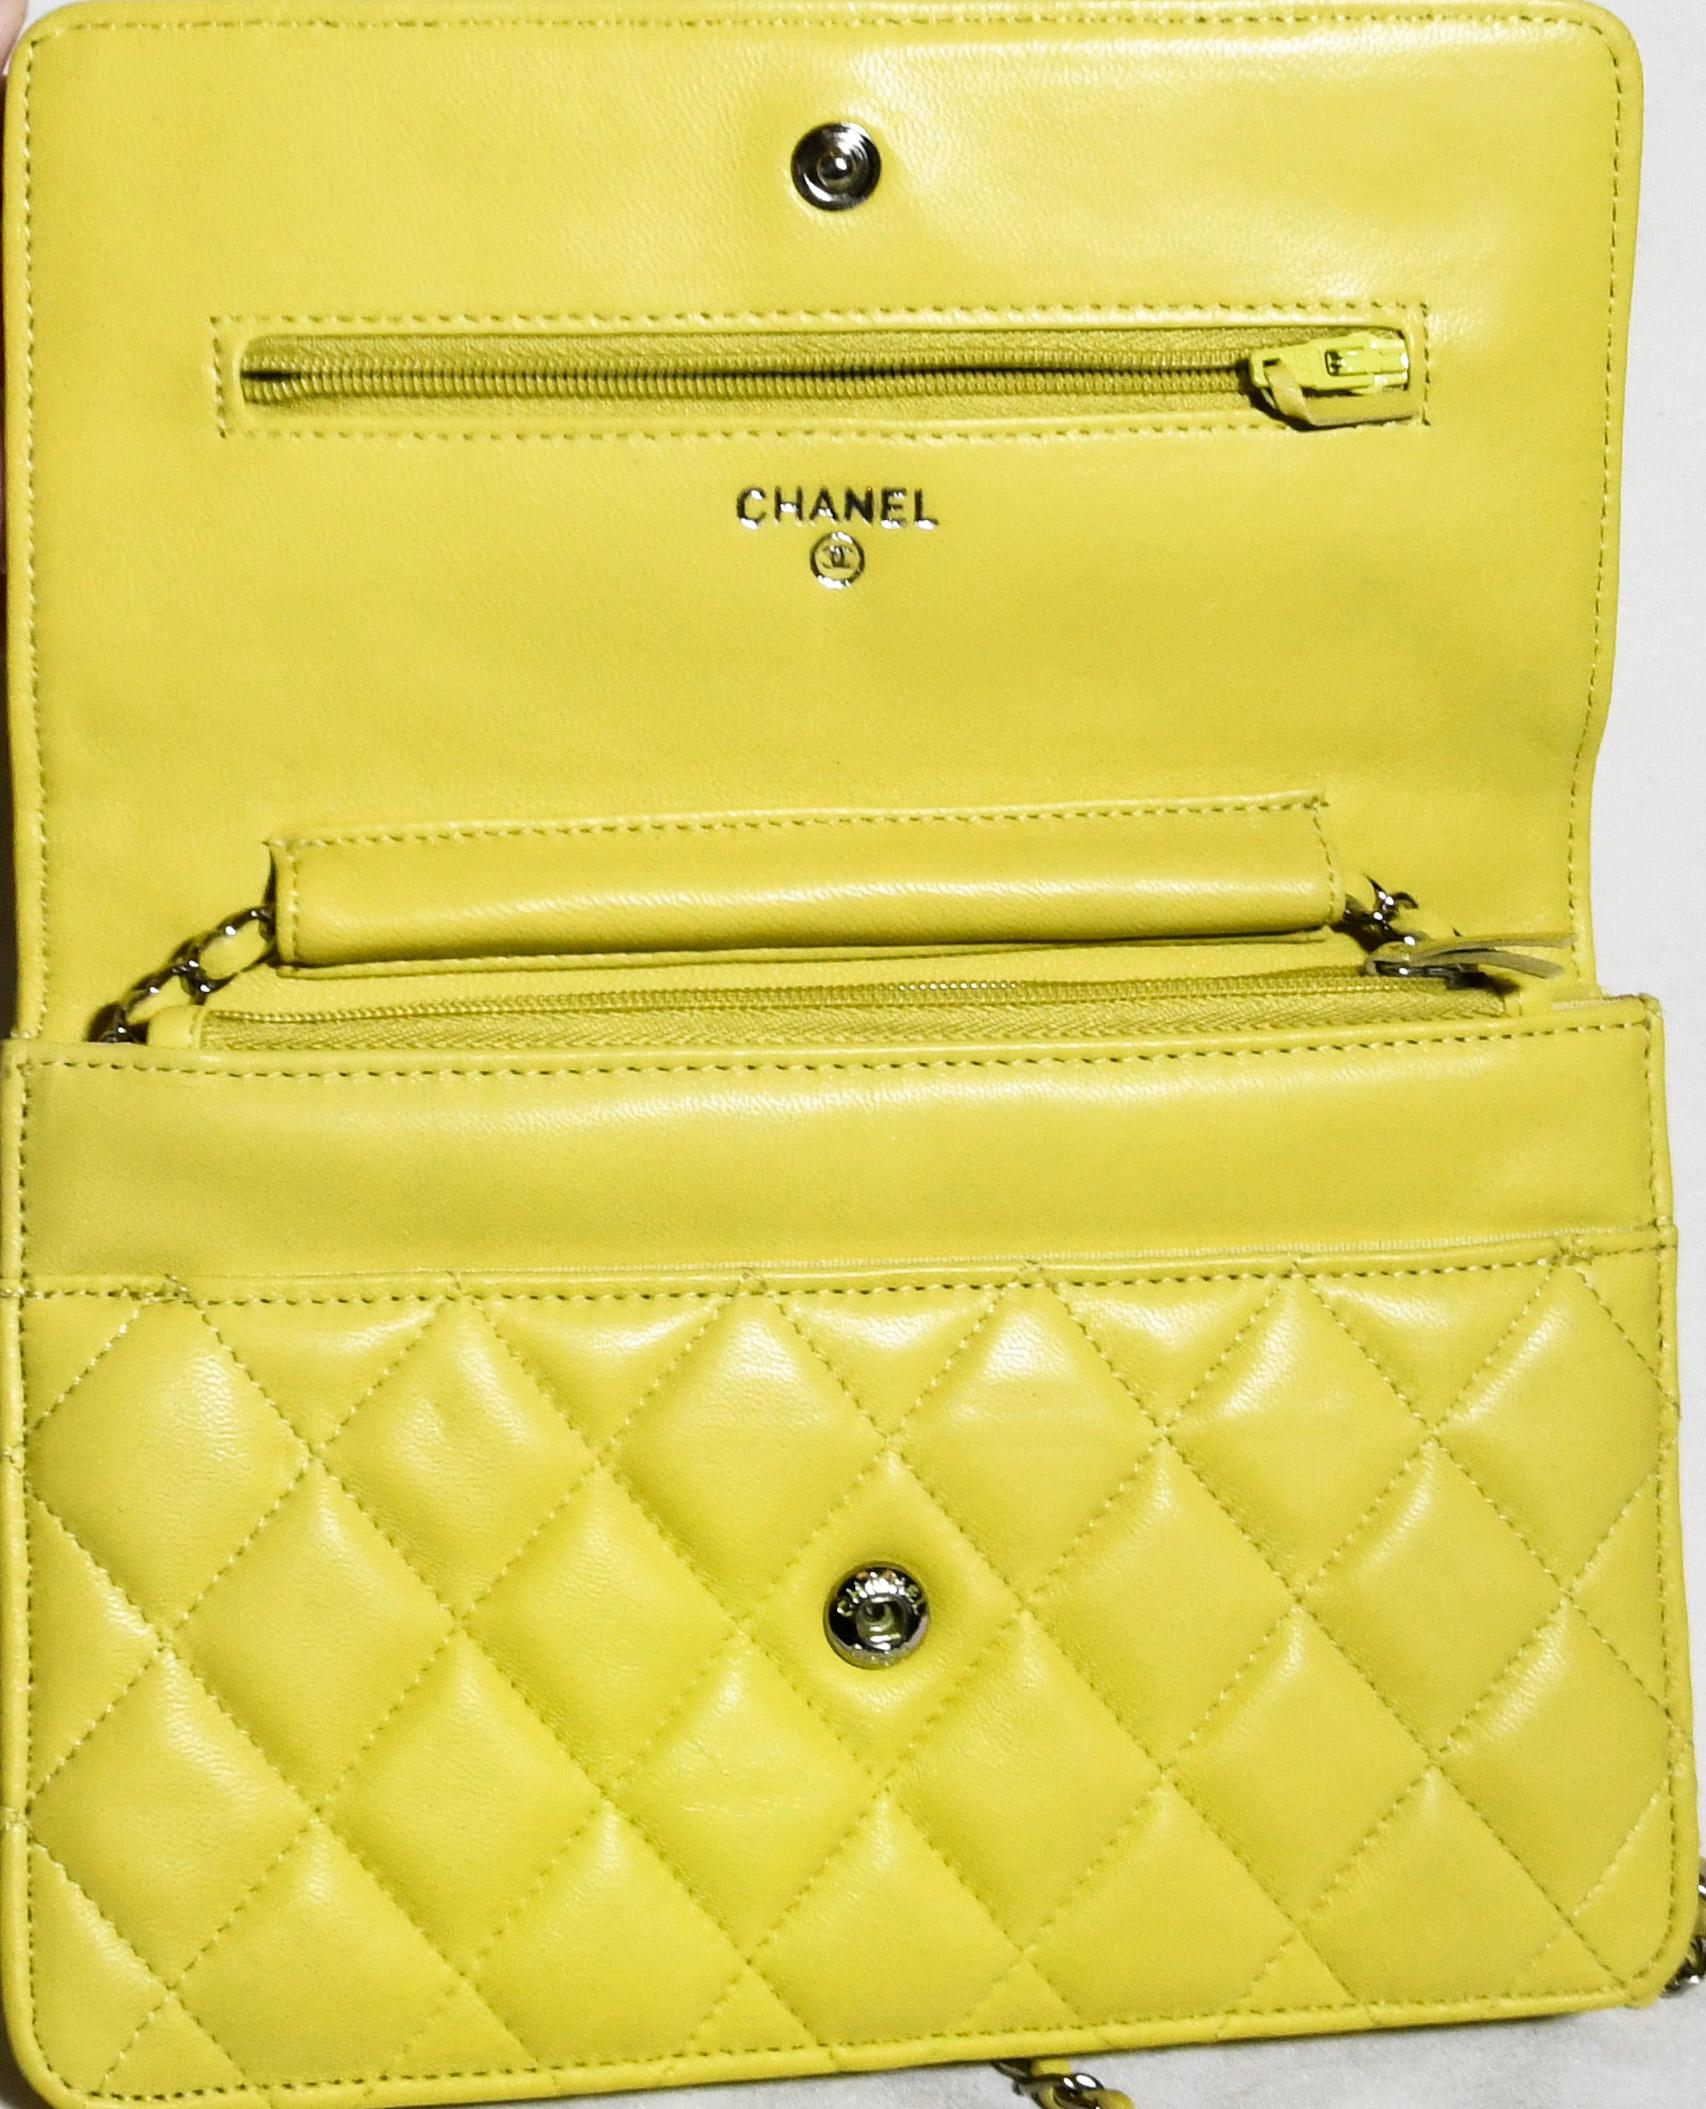 Yellow Chanel Lemon Lime Quilted Leather W/ Silver Tone Shoulder Chain Link Flap Wallet